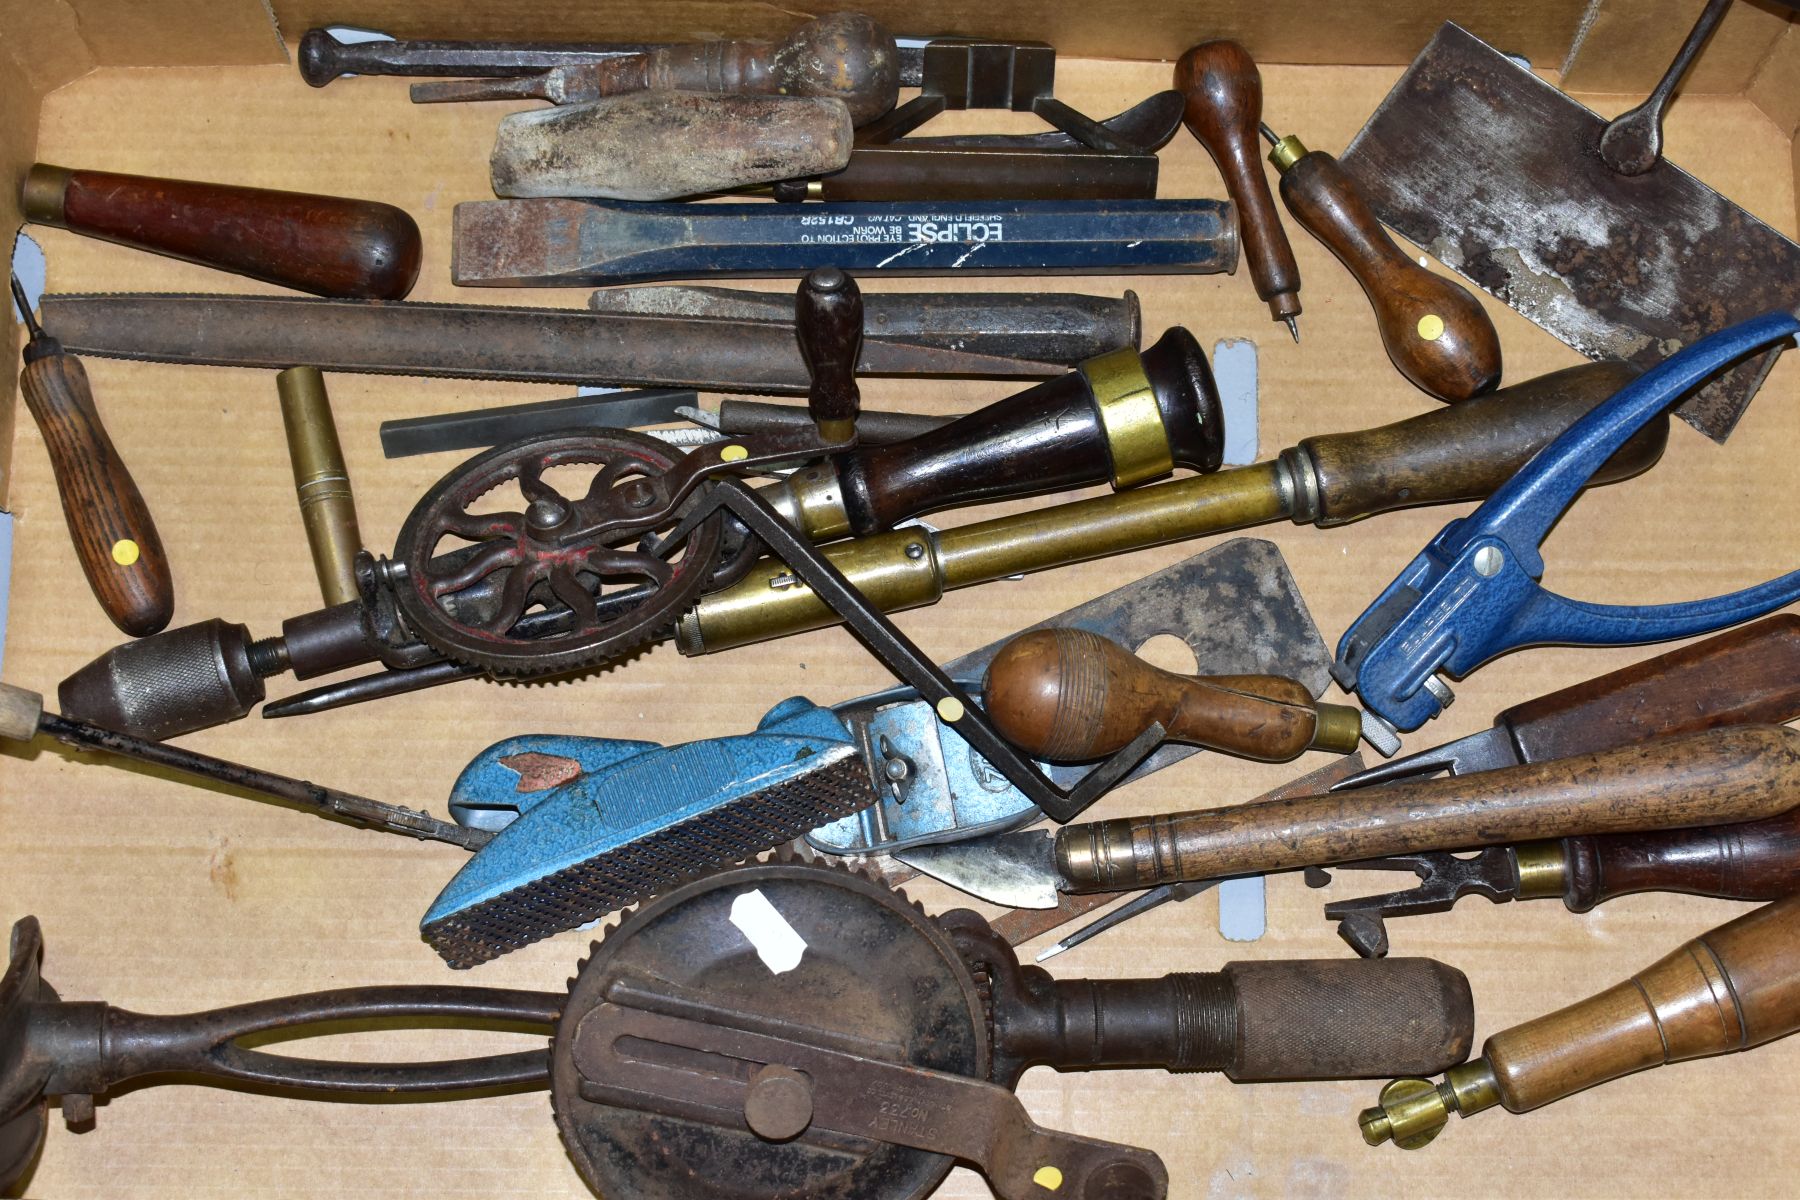 A TRAY CONTAINING VINTAGE HANDTOOLS including a North Bros Yankie, a Sycamore saw, a Stanley No - Image 2 of 6